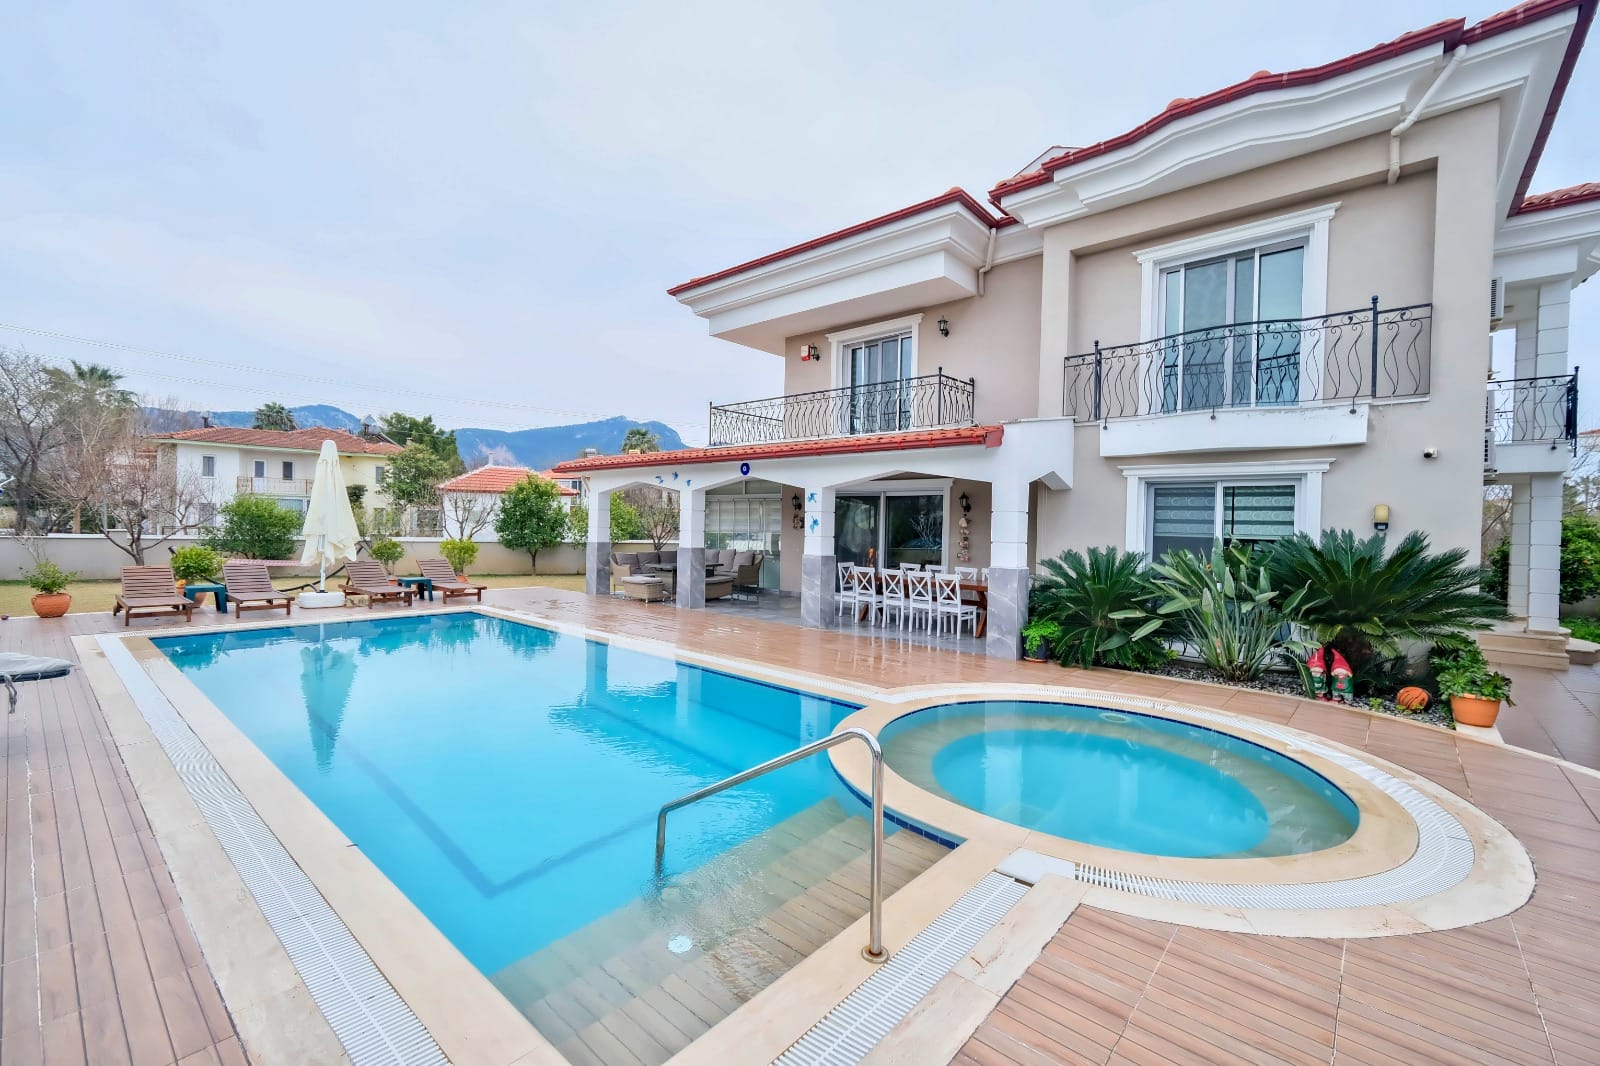 Villa with pool in the center of Dalyan